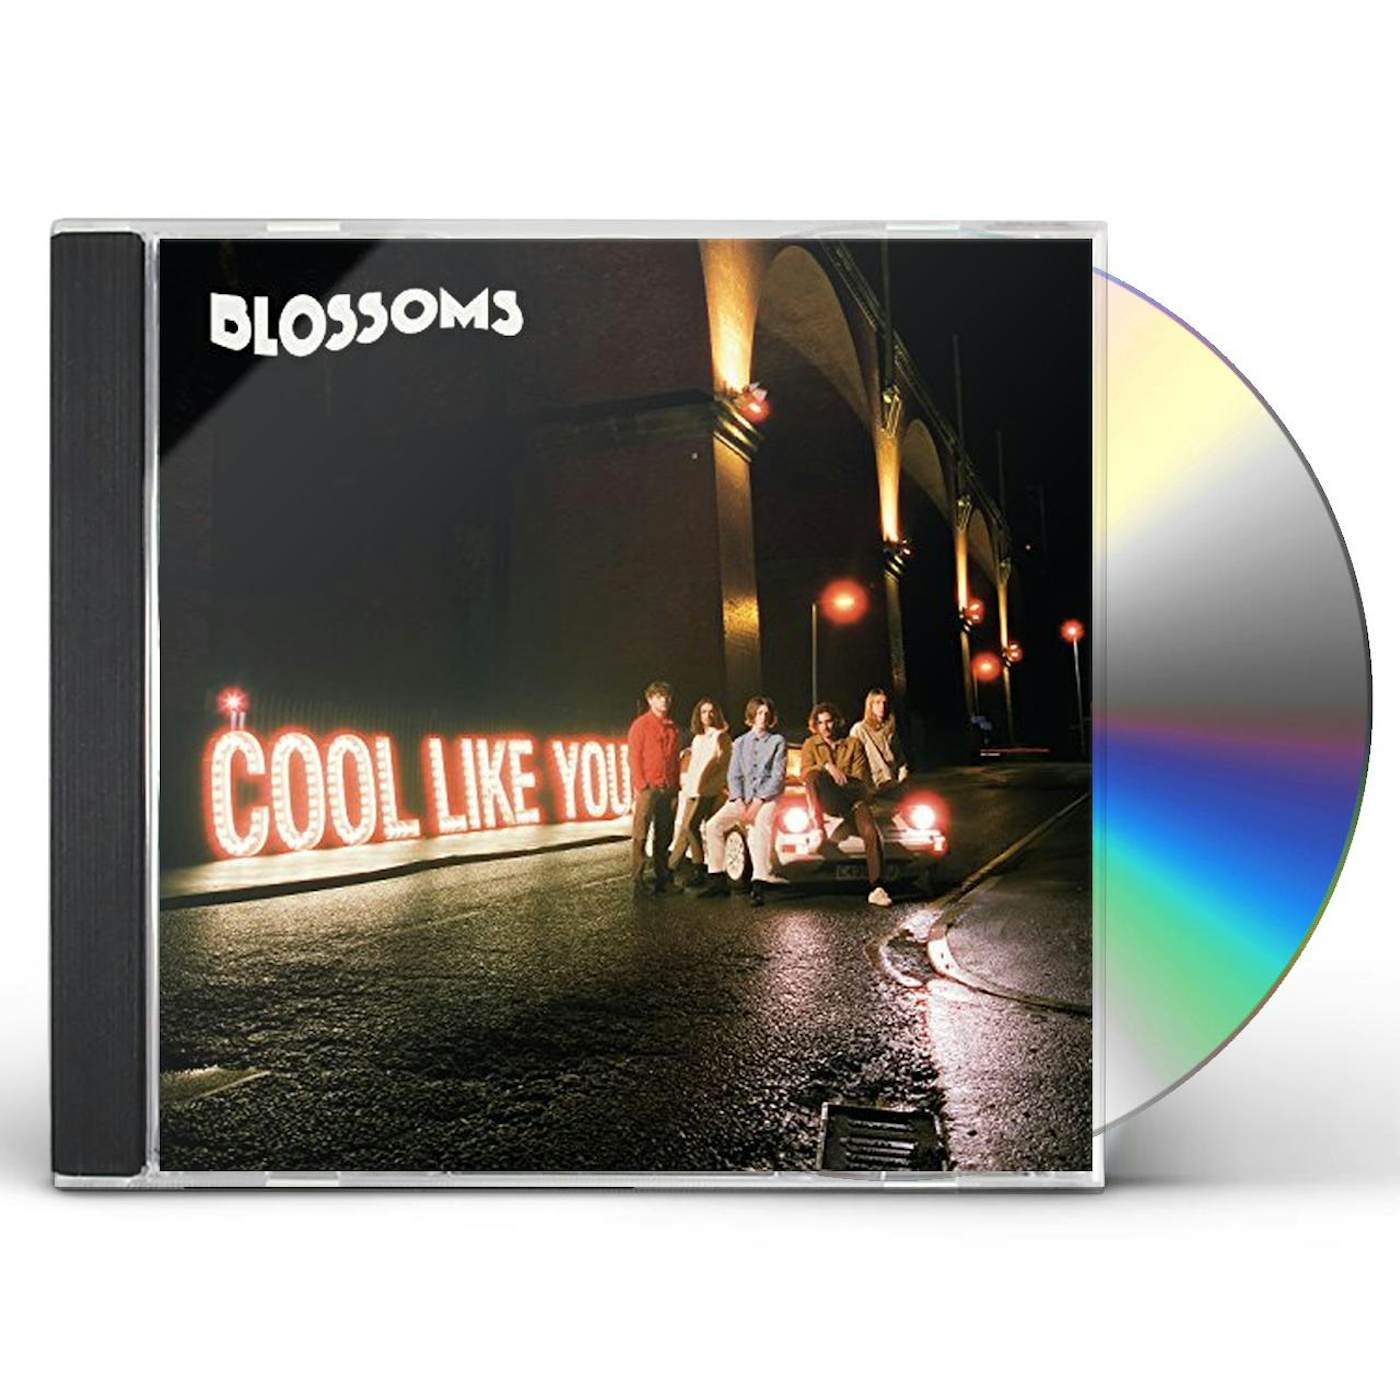 Blossoms COOL LIKE YOU CD